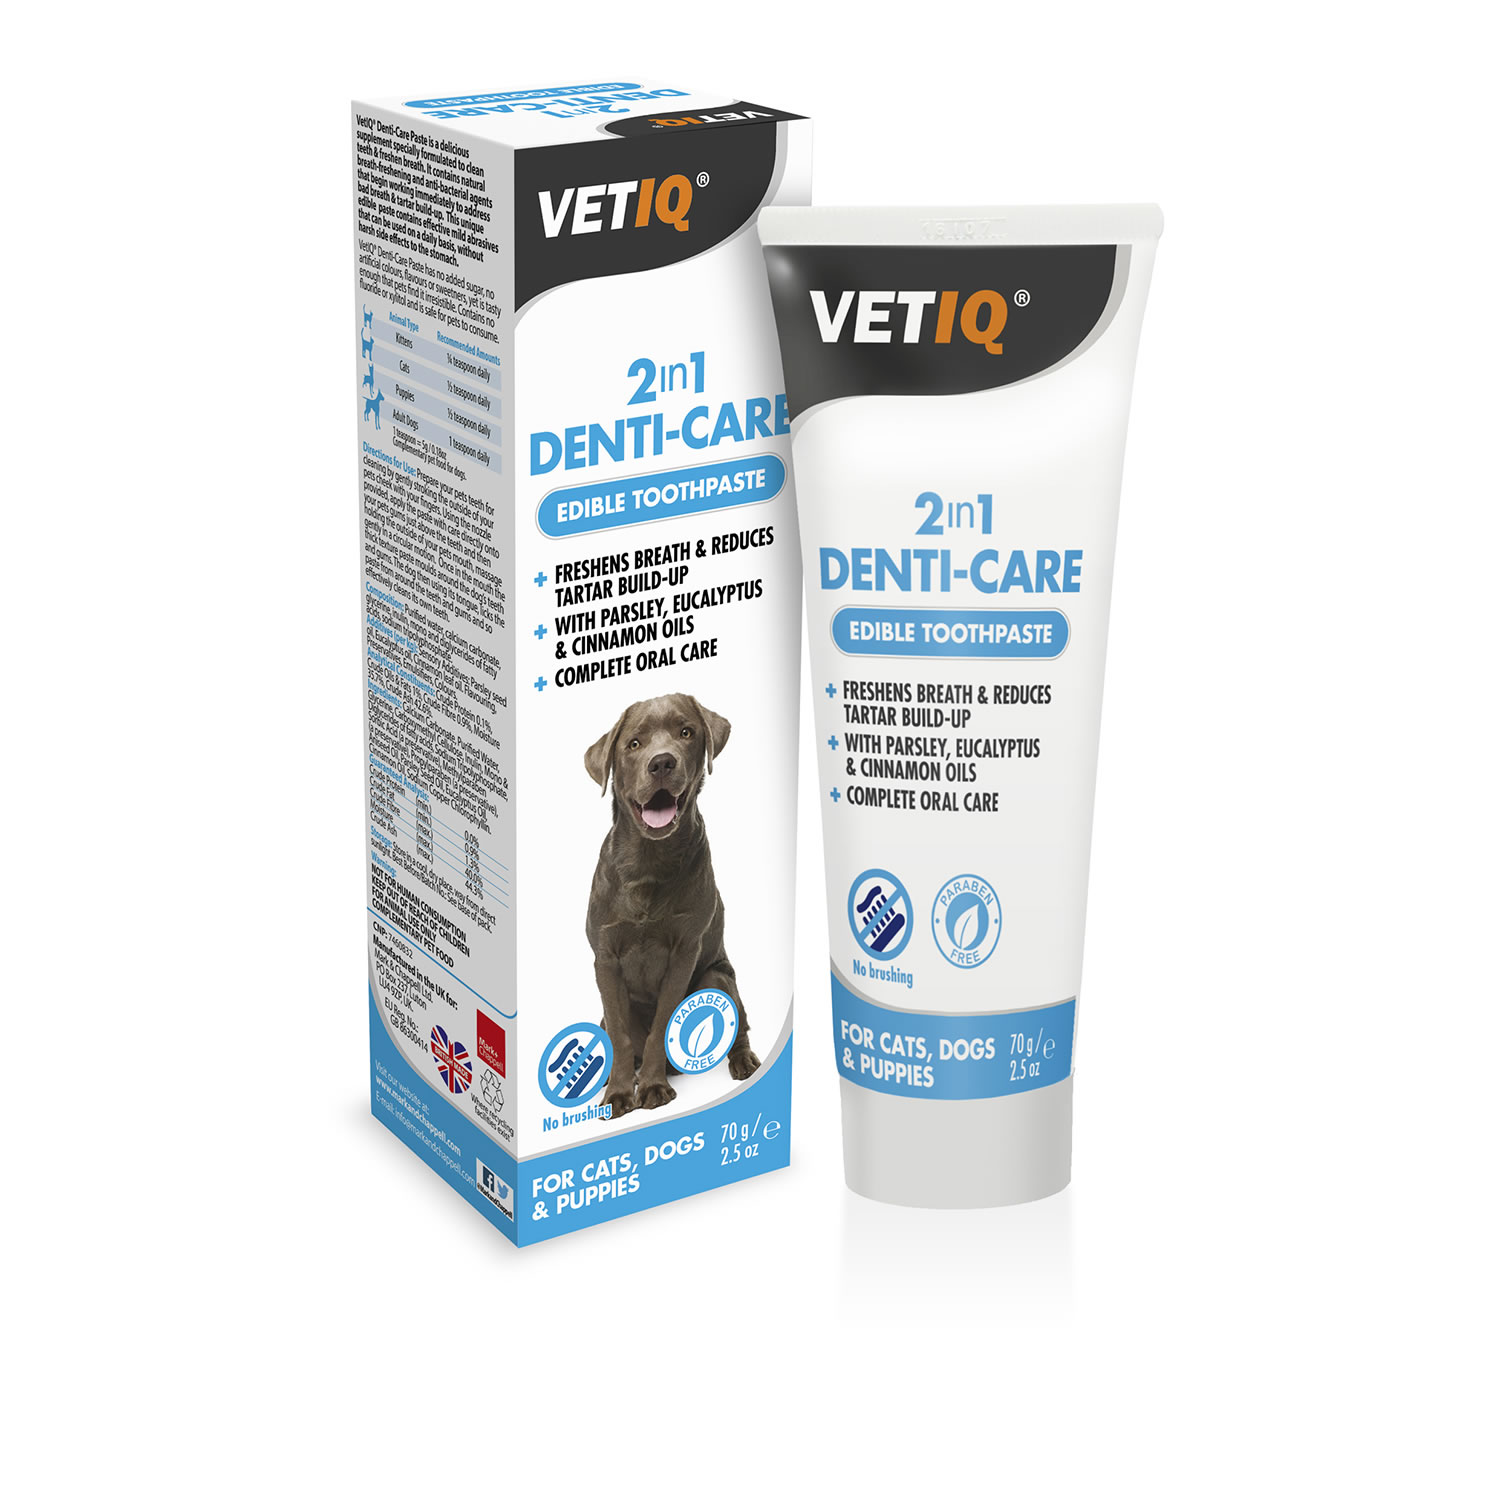 VETIQ 2IN1 DENTI-CARE EDIBLE TOOTHPASTE FOR DOGS & PUPPIES 70 GM 70 GM